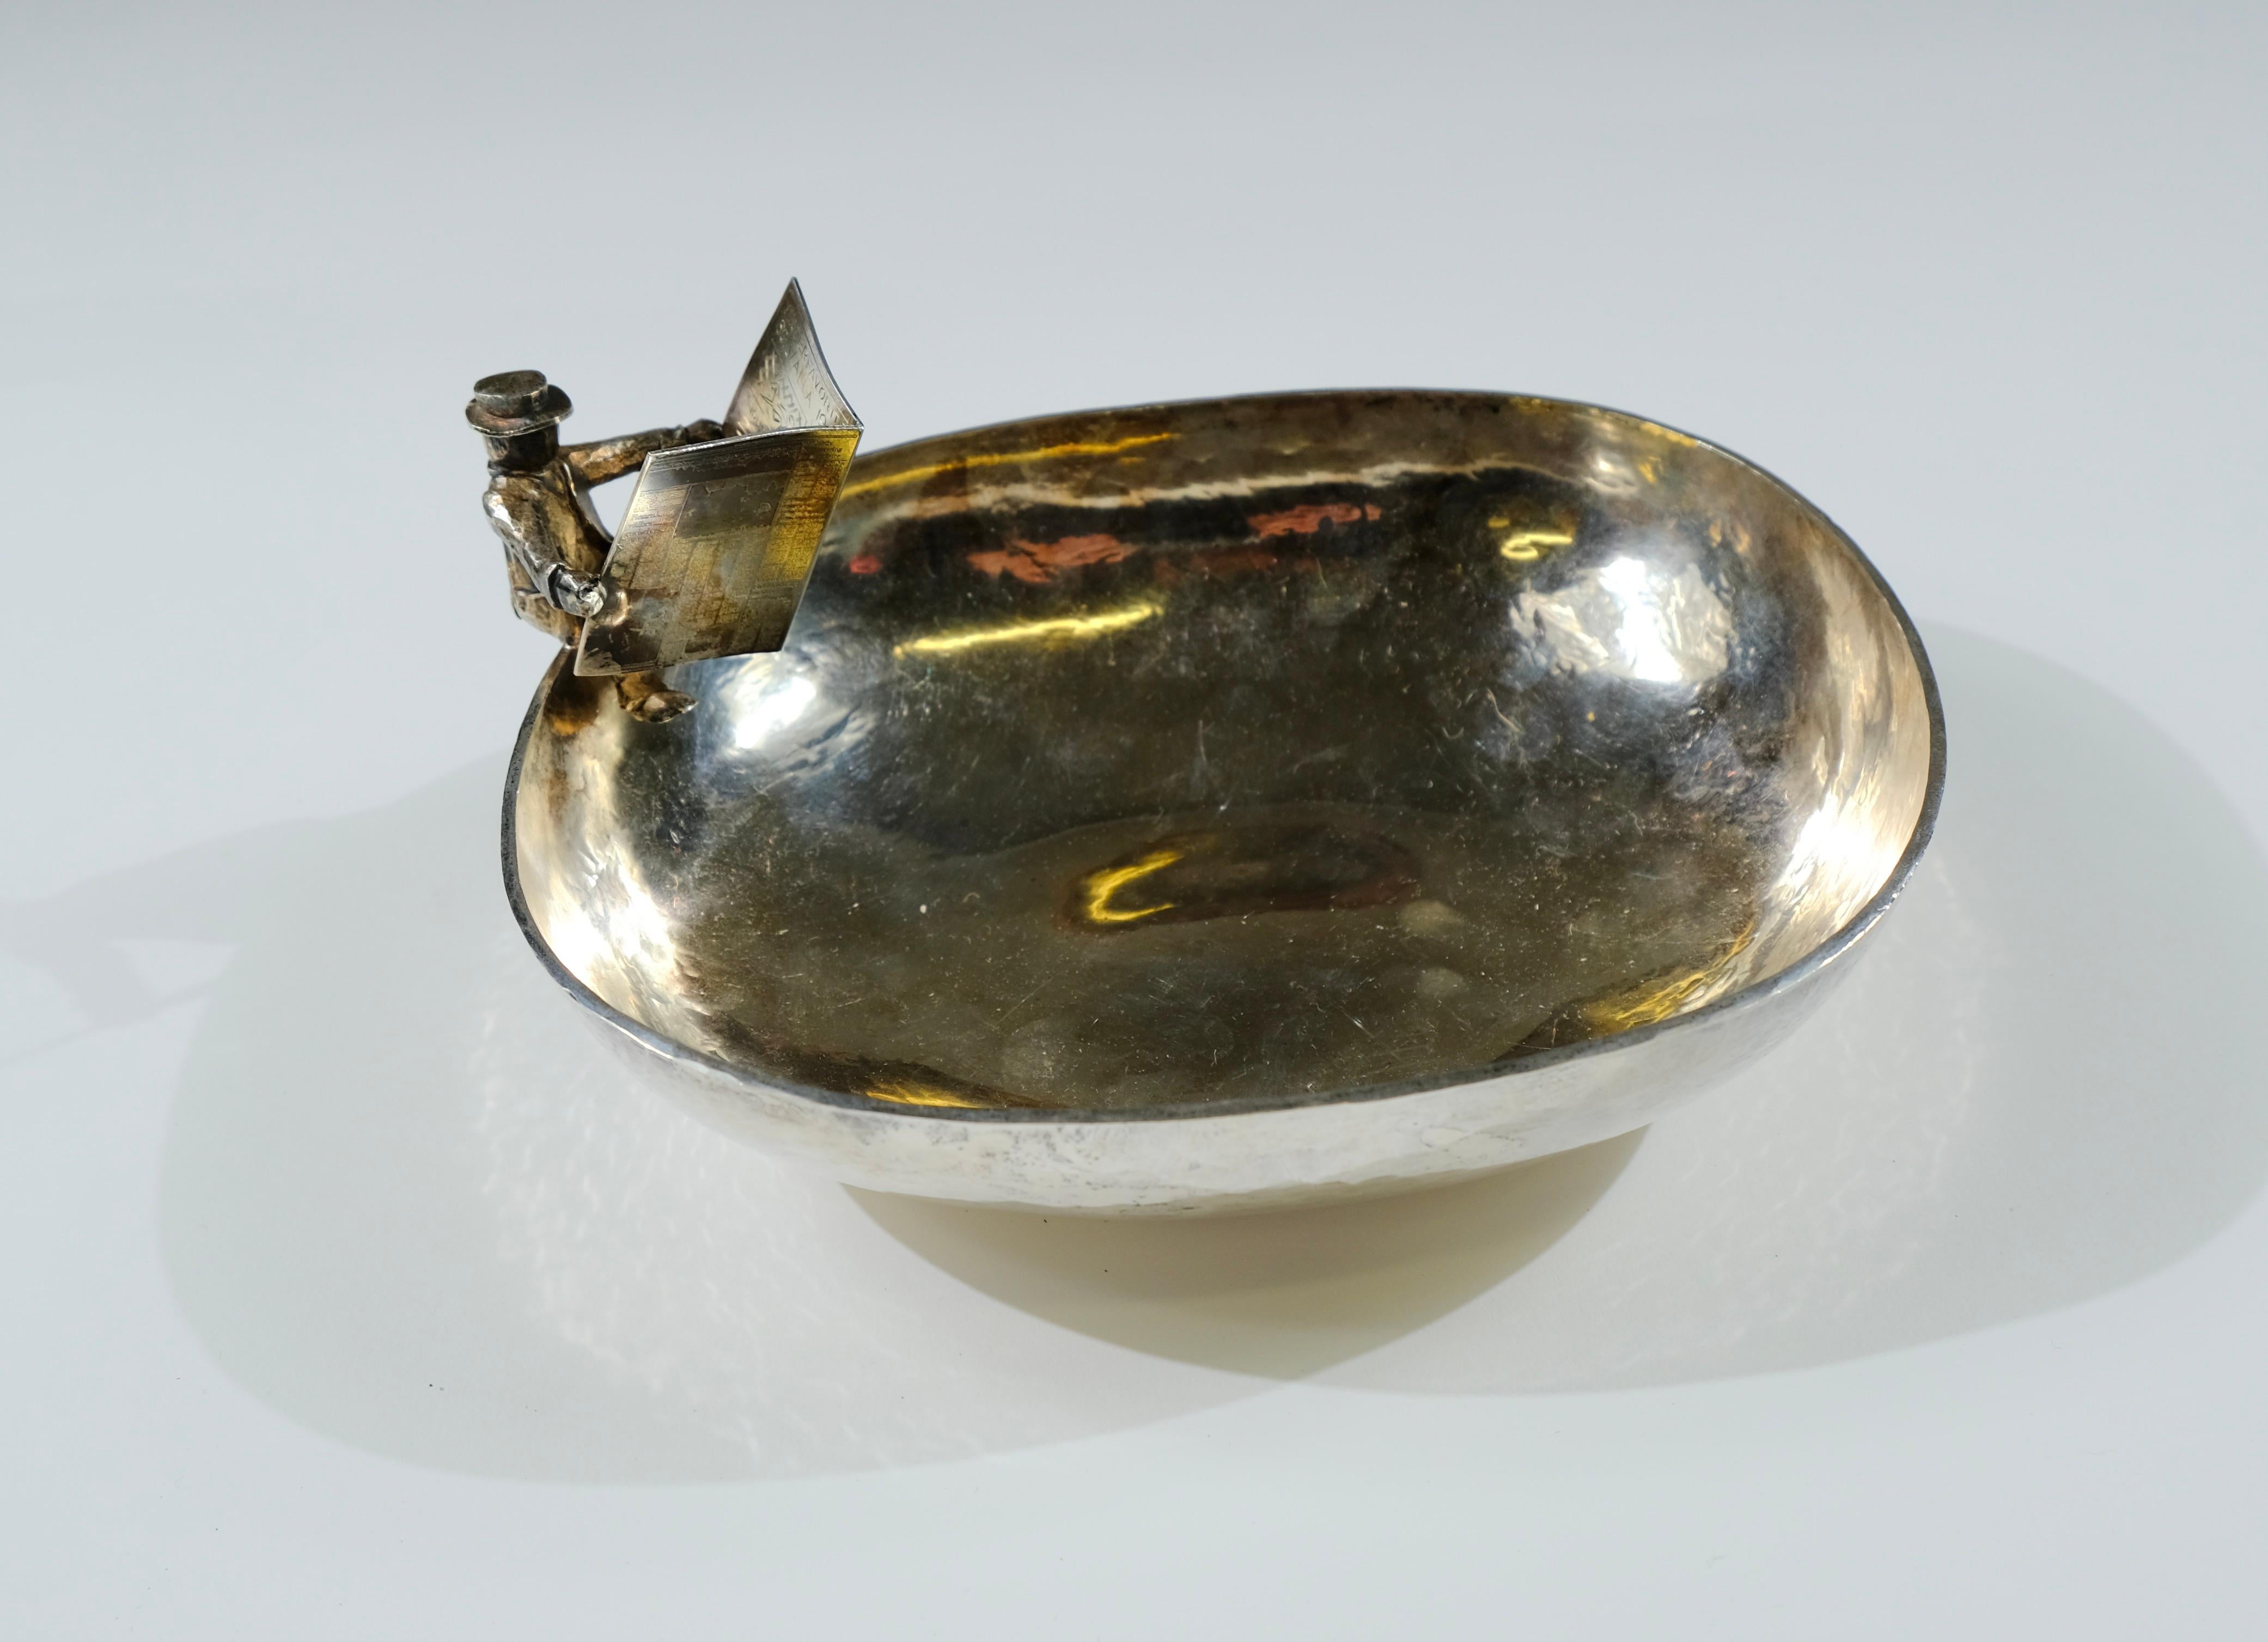 A silver-bowl made in 1982 by the Swedish silversmith Jan Lundgren. The bowl was made as a price in horse racing and has an inscription that says “Dagens Nyheters Vinterfavorit 1982”. 

The design is both interesting and funny where a man sits on